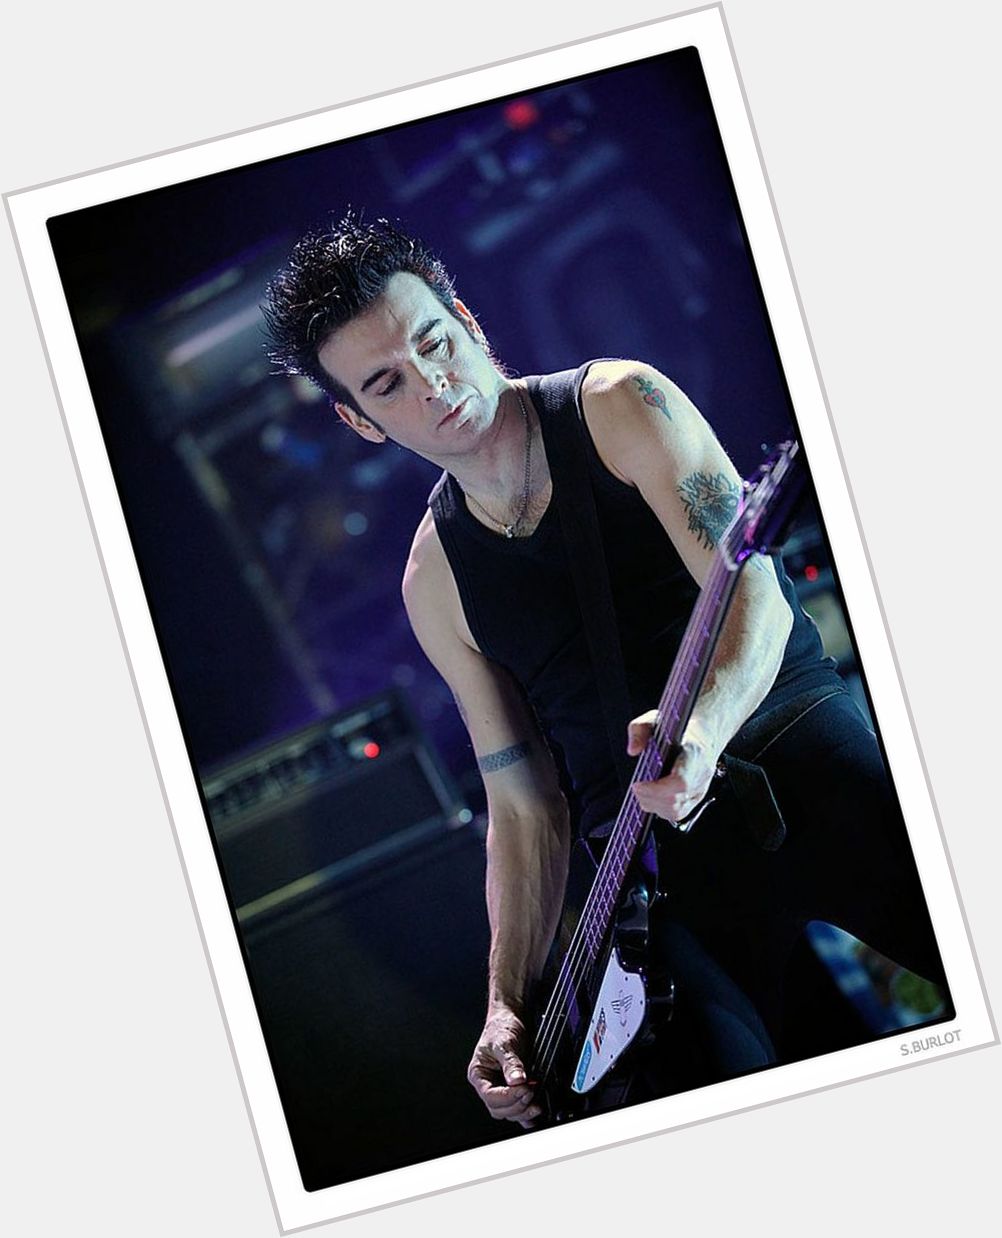 Happy birthday to The Cure\s Simon Gallup. One of the most underrated bassists of all time. 